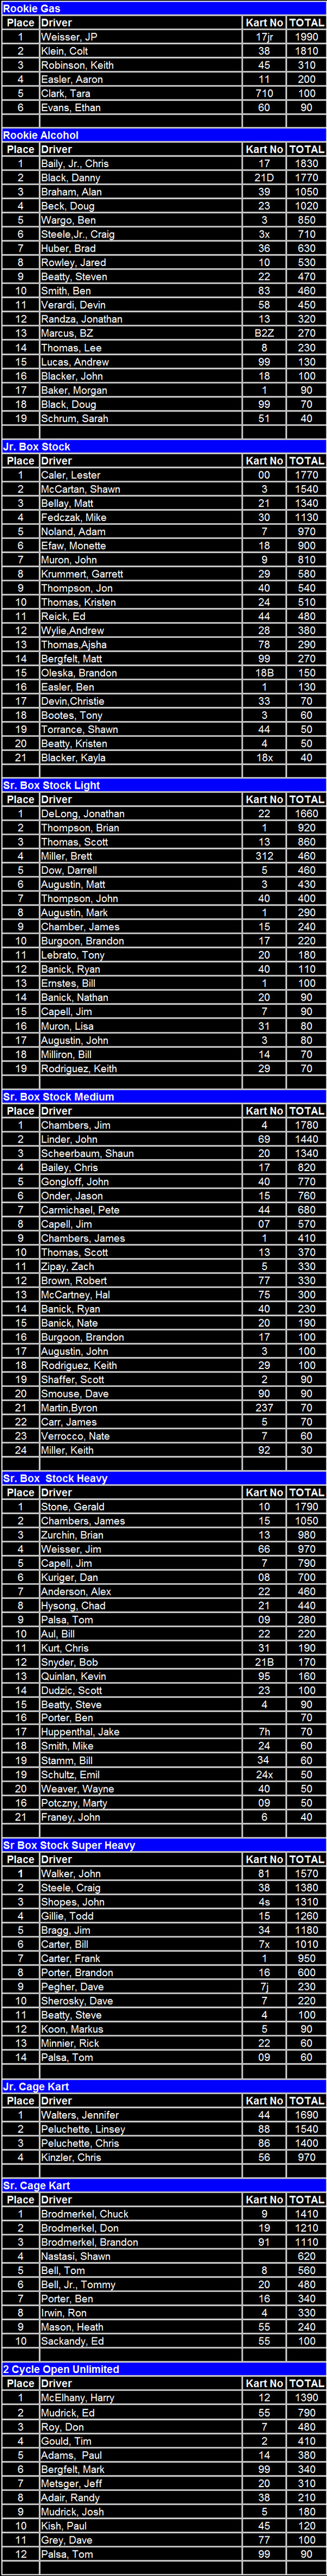 Naugle Speedway 2001 Final Point Standings